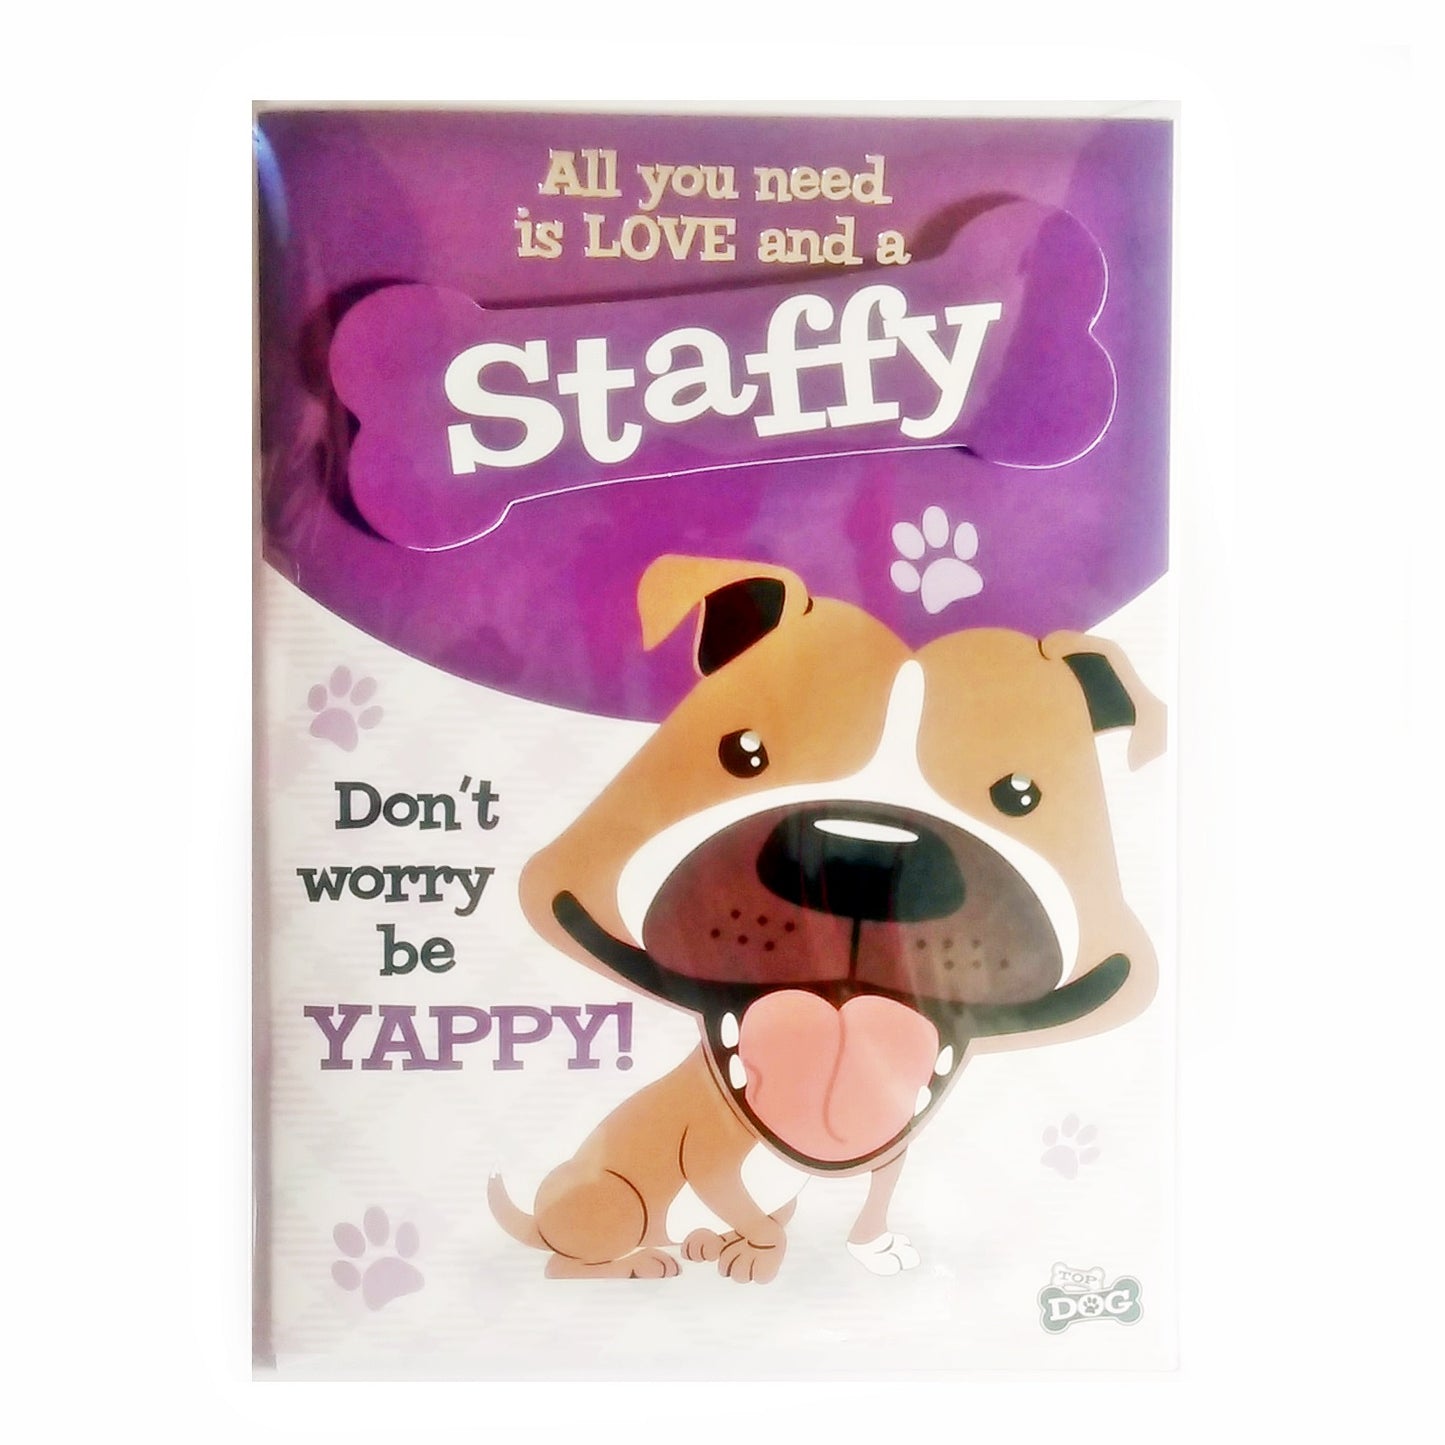 Wags & Whiskers Dog Greeting Card "Staffy Brown" by Paper Island